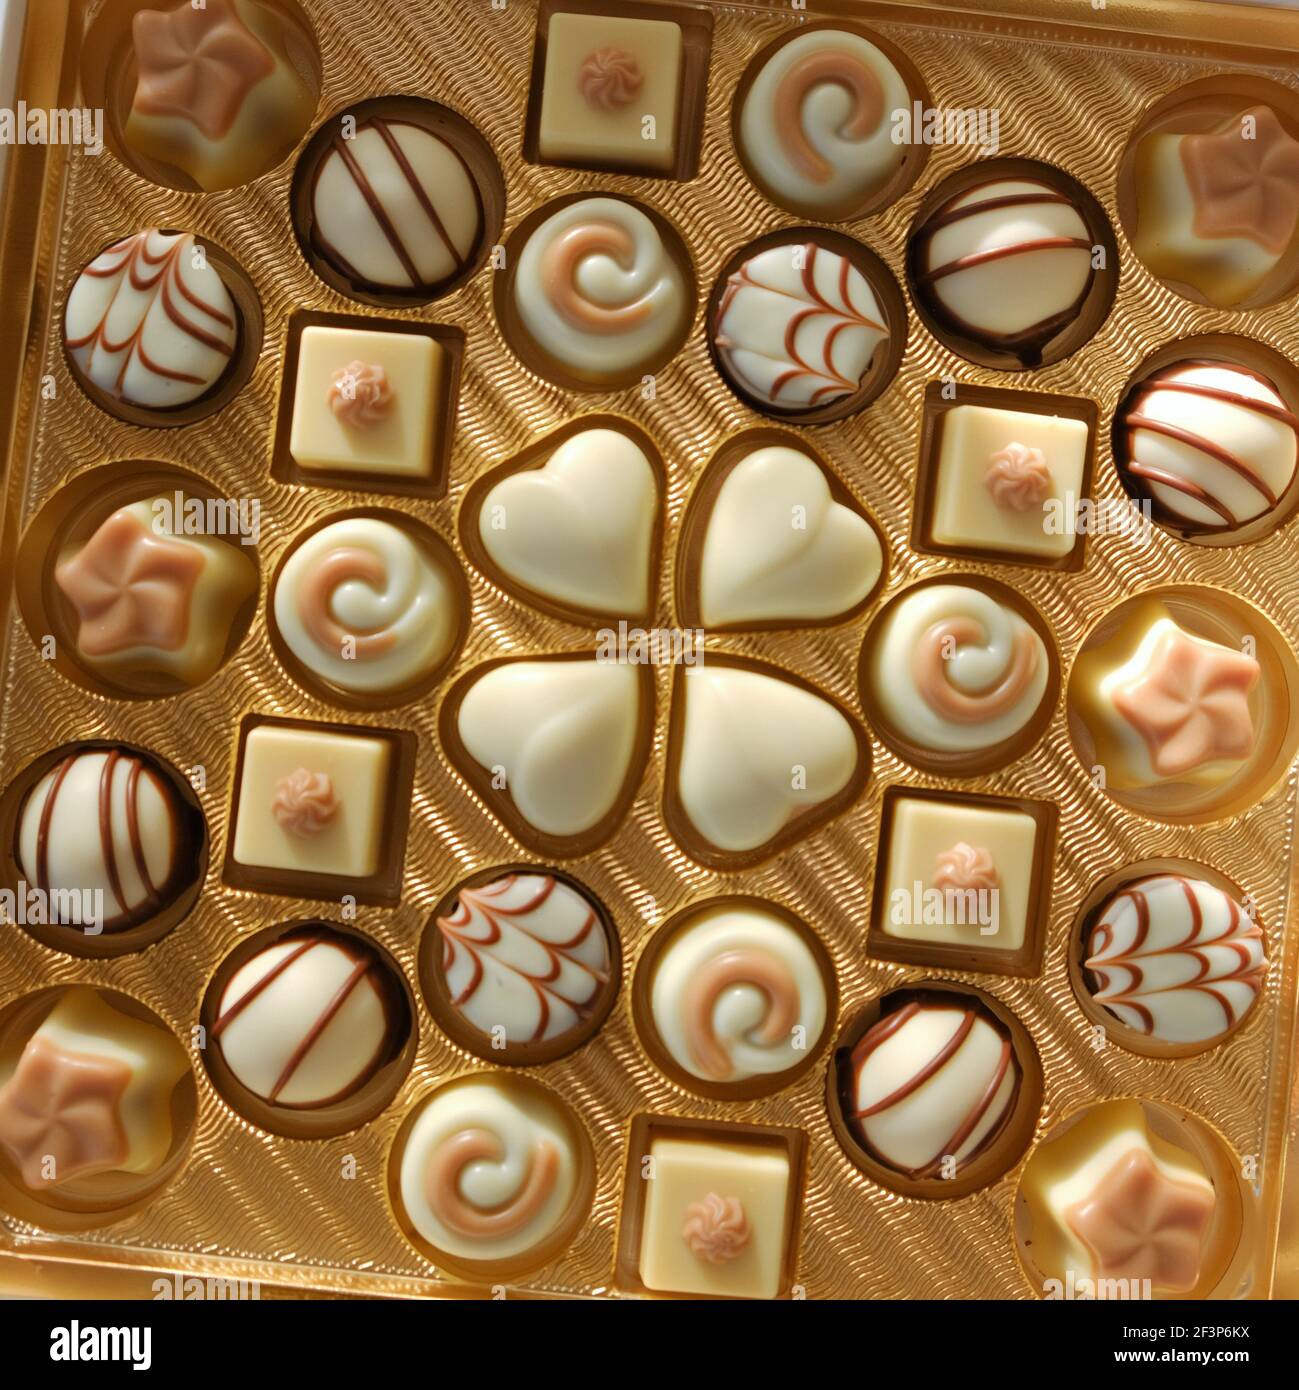 Chocolate candy .White chocolate. Assorted chocolate truffles in a gold box close-up. Sweets and desserts concept.chocolate sweets.Chocolate candies Stock Photo